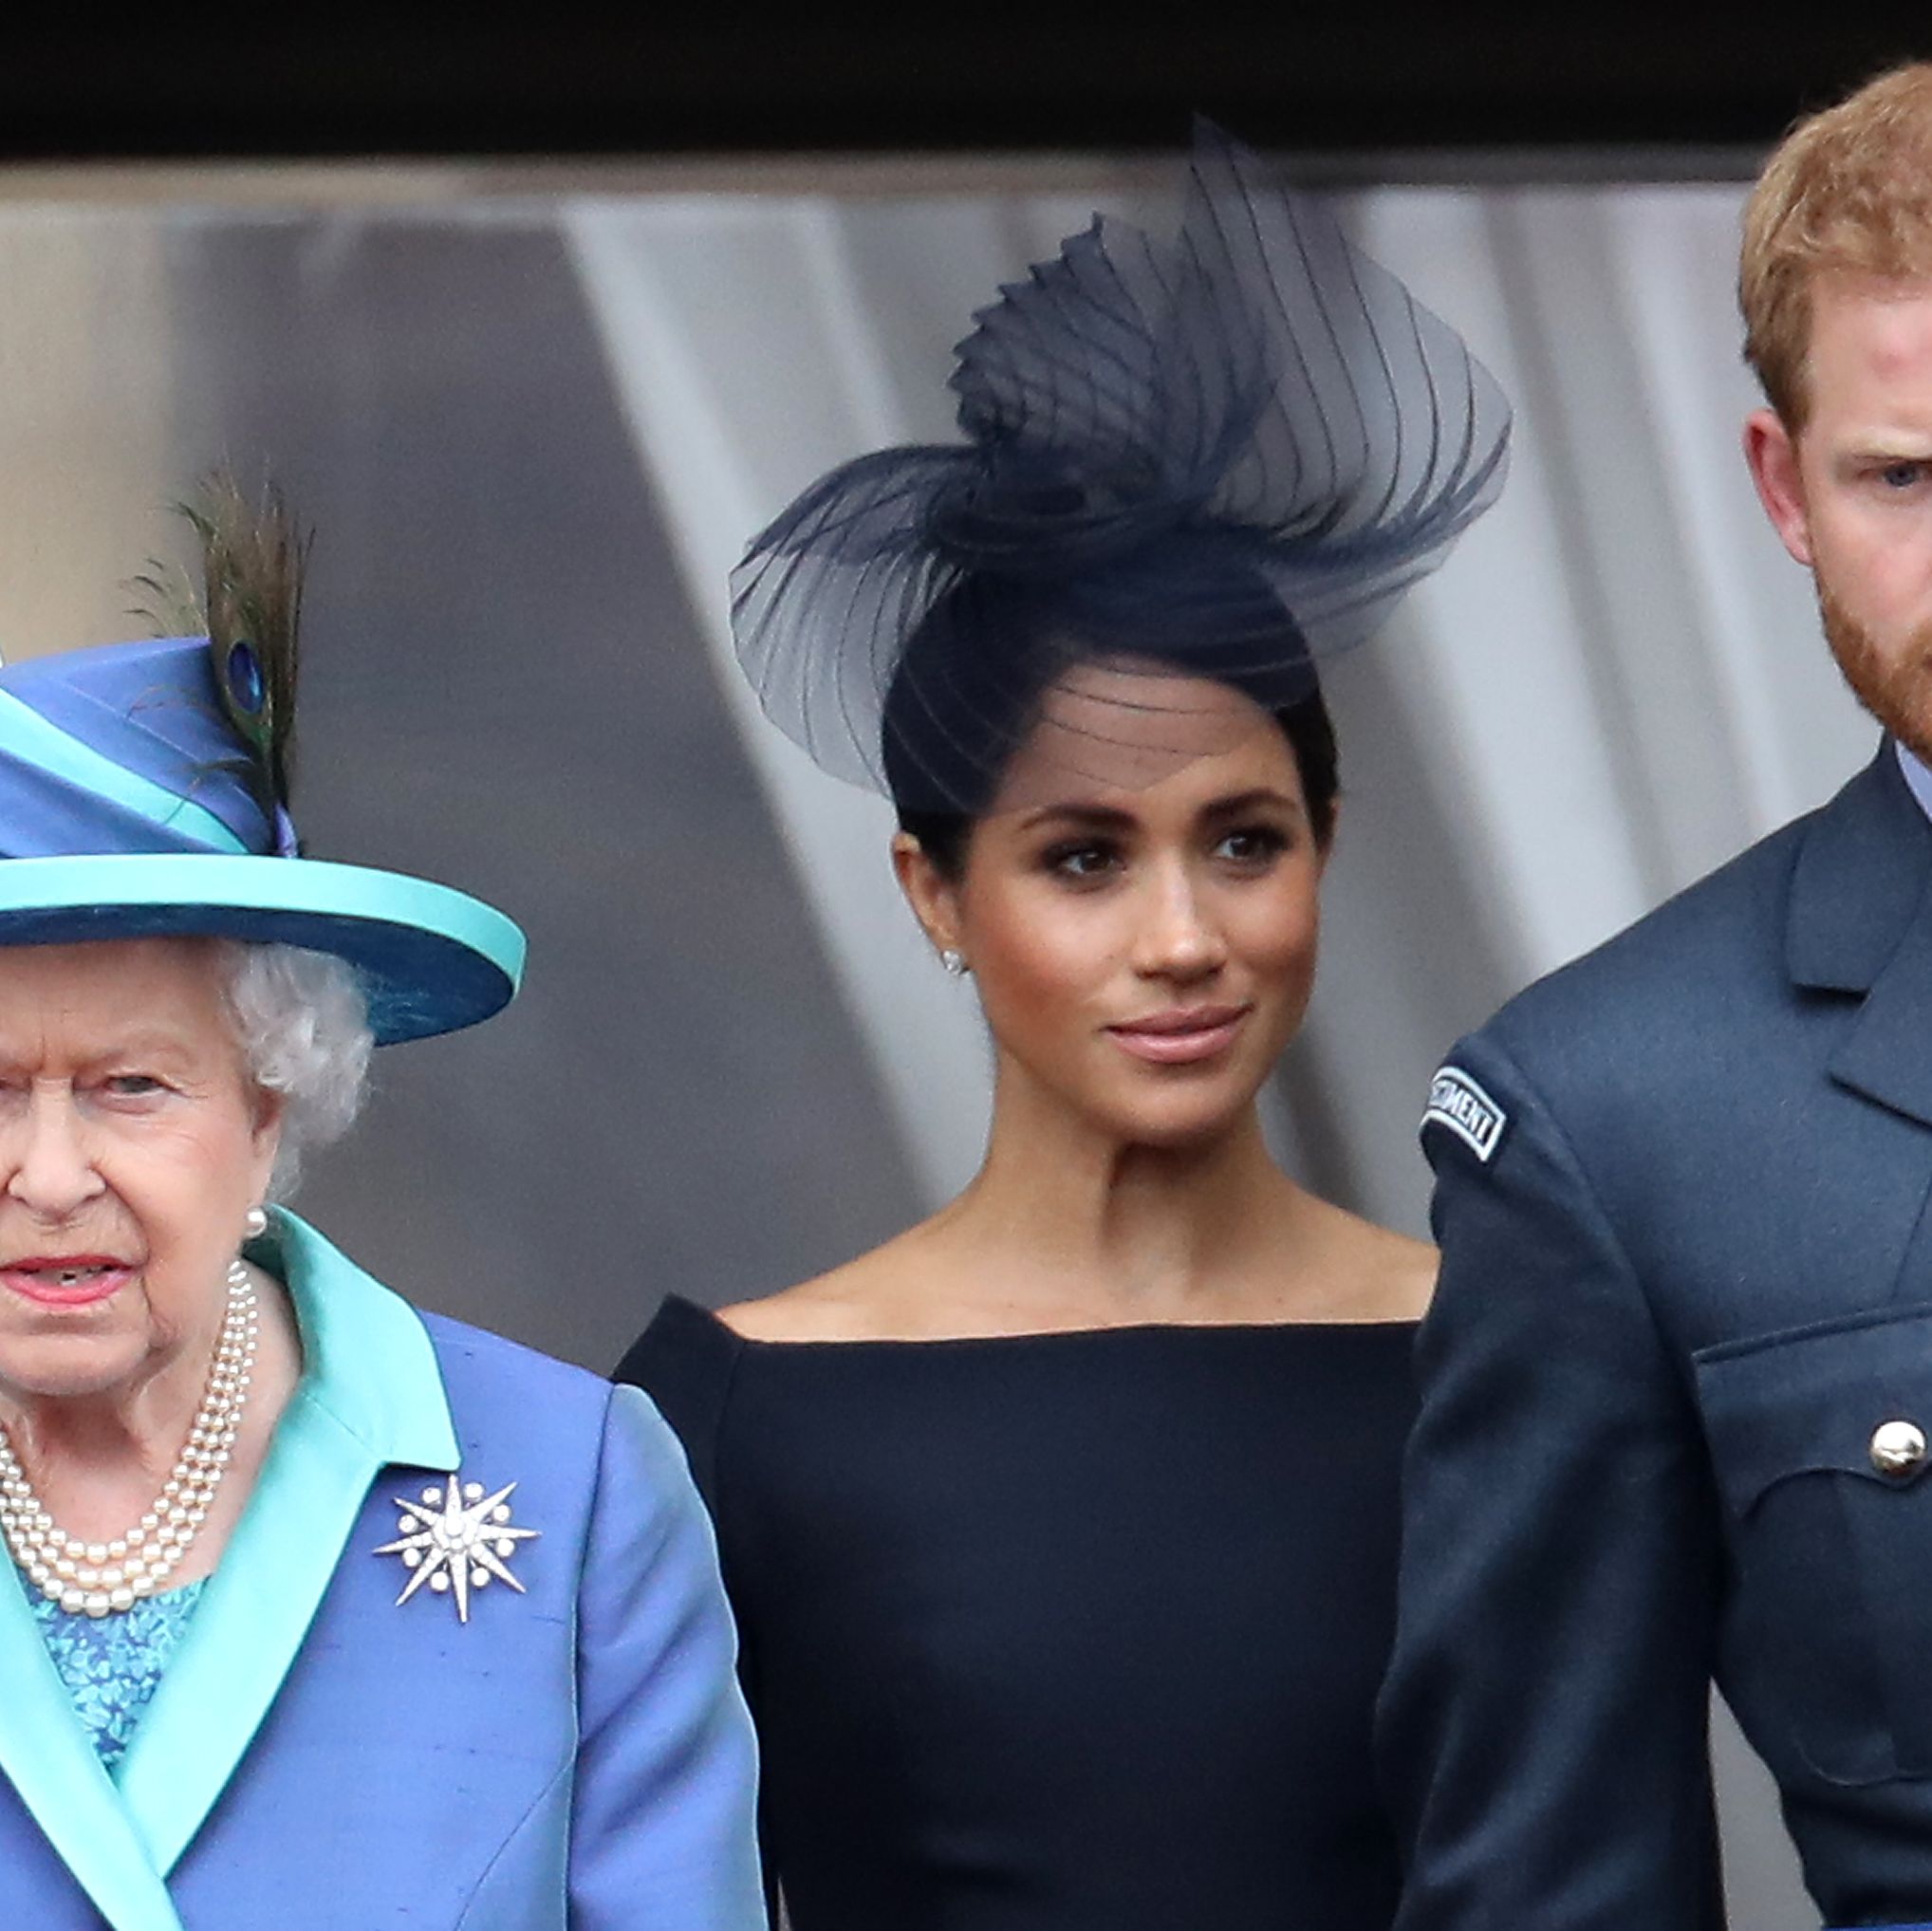 The Sussexes are joining Charles and William following news the Queen has been put on medical supervision.